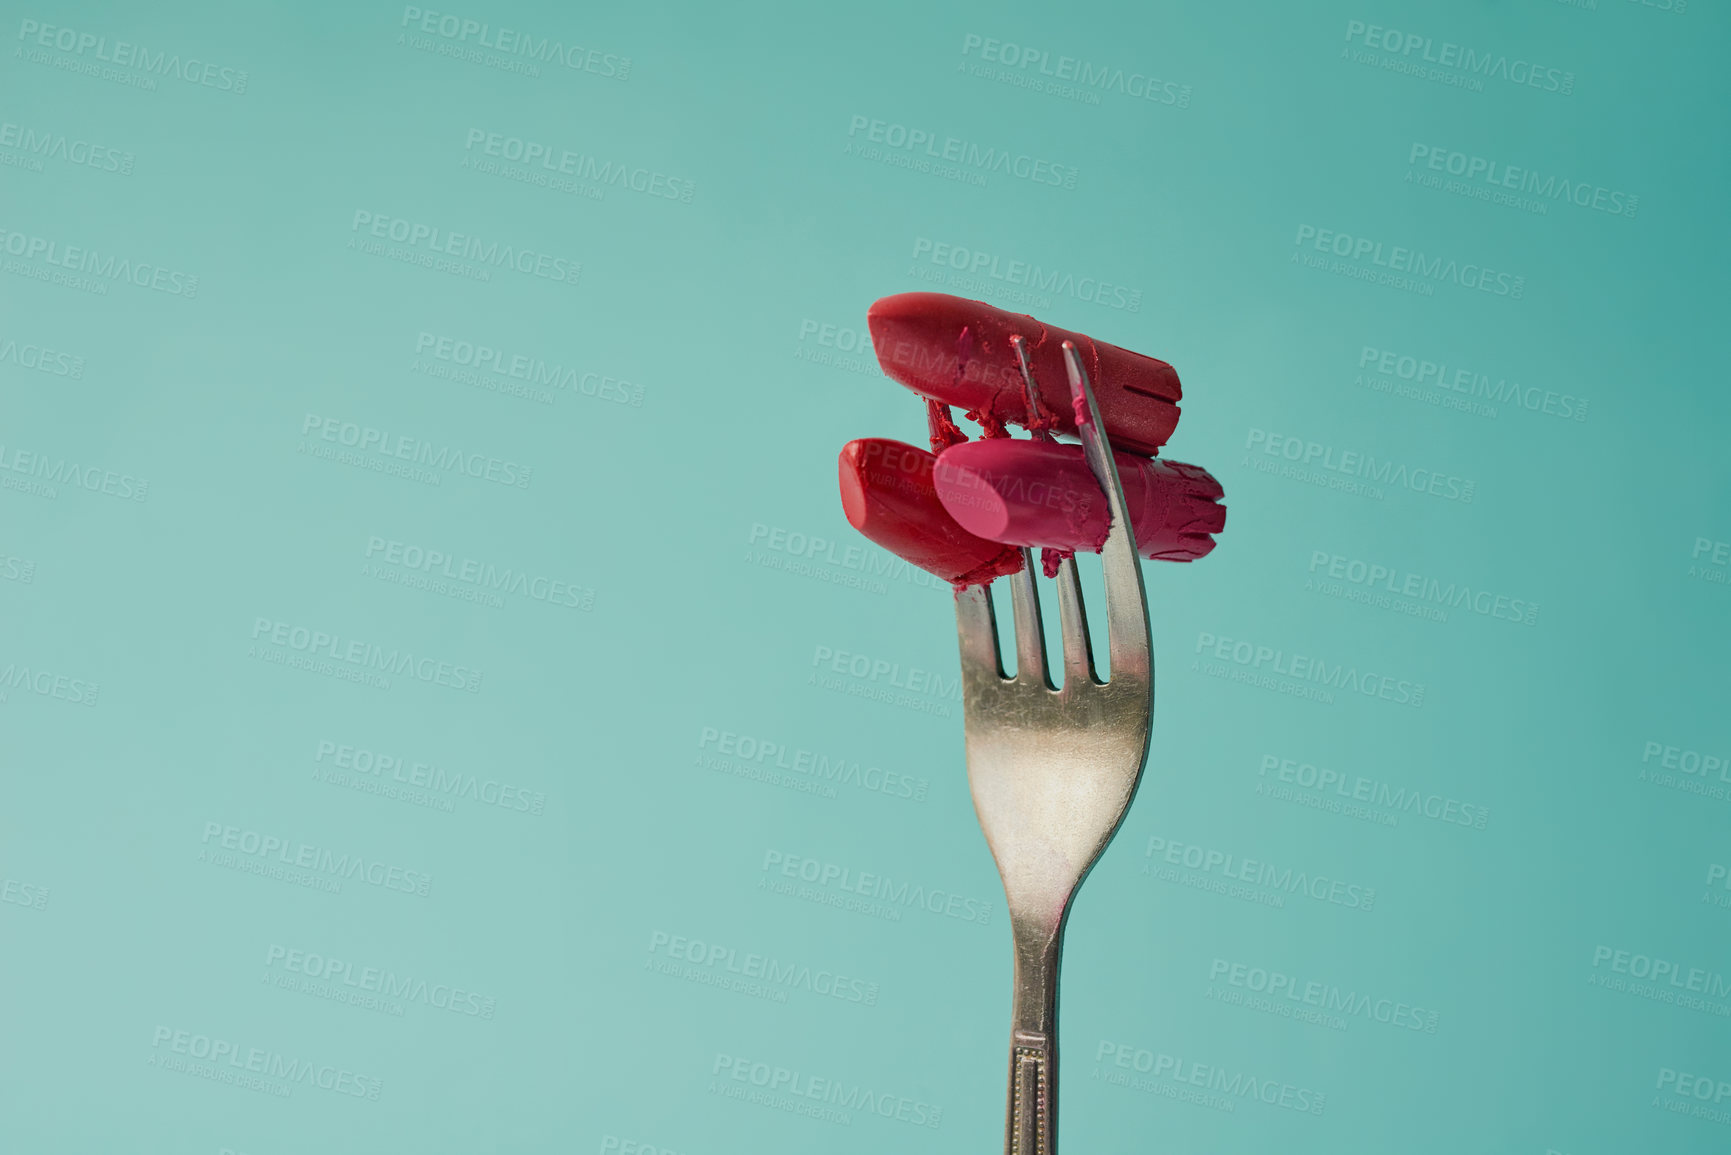 Buy stock photo Cropped studio shot of lipstick on a fork against a turquoise background